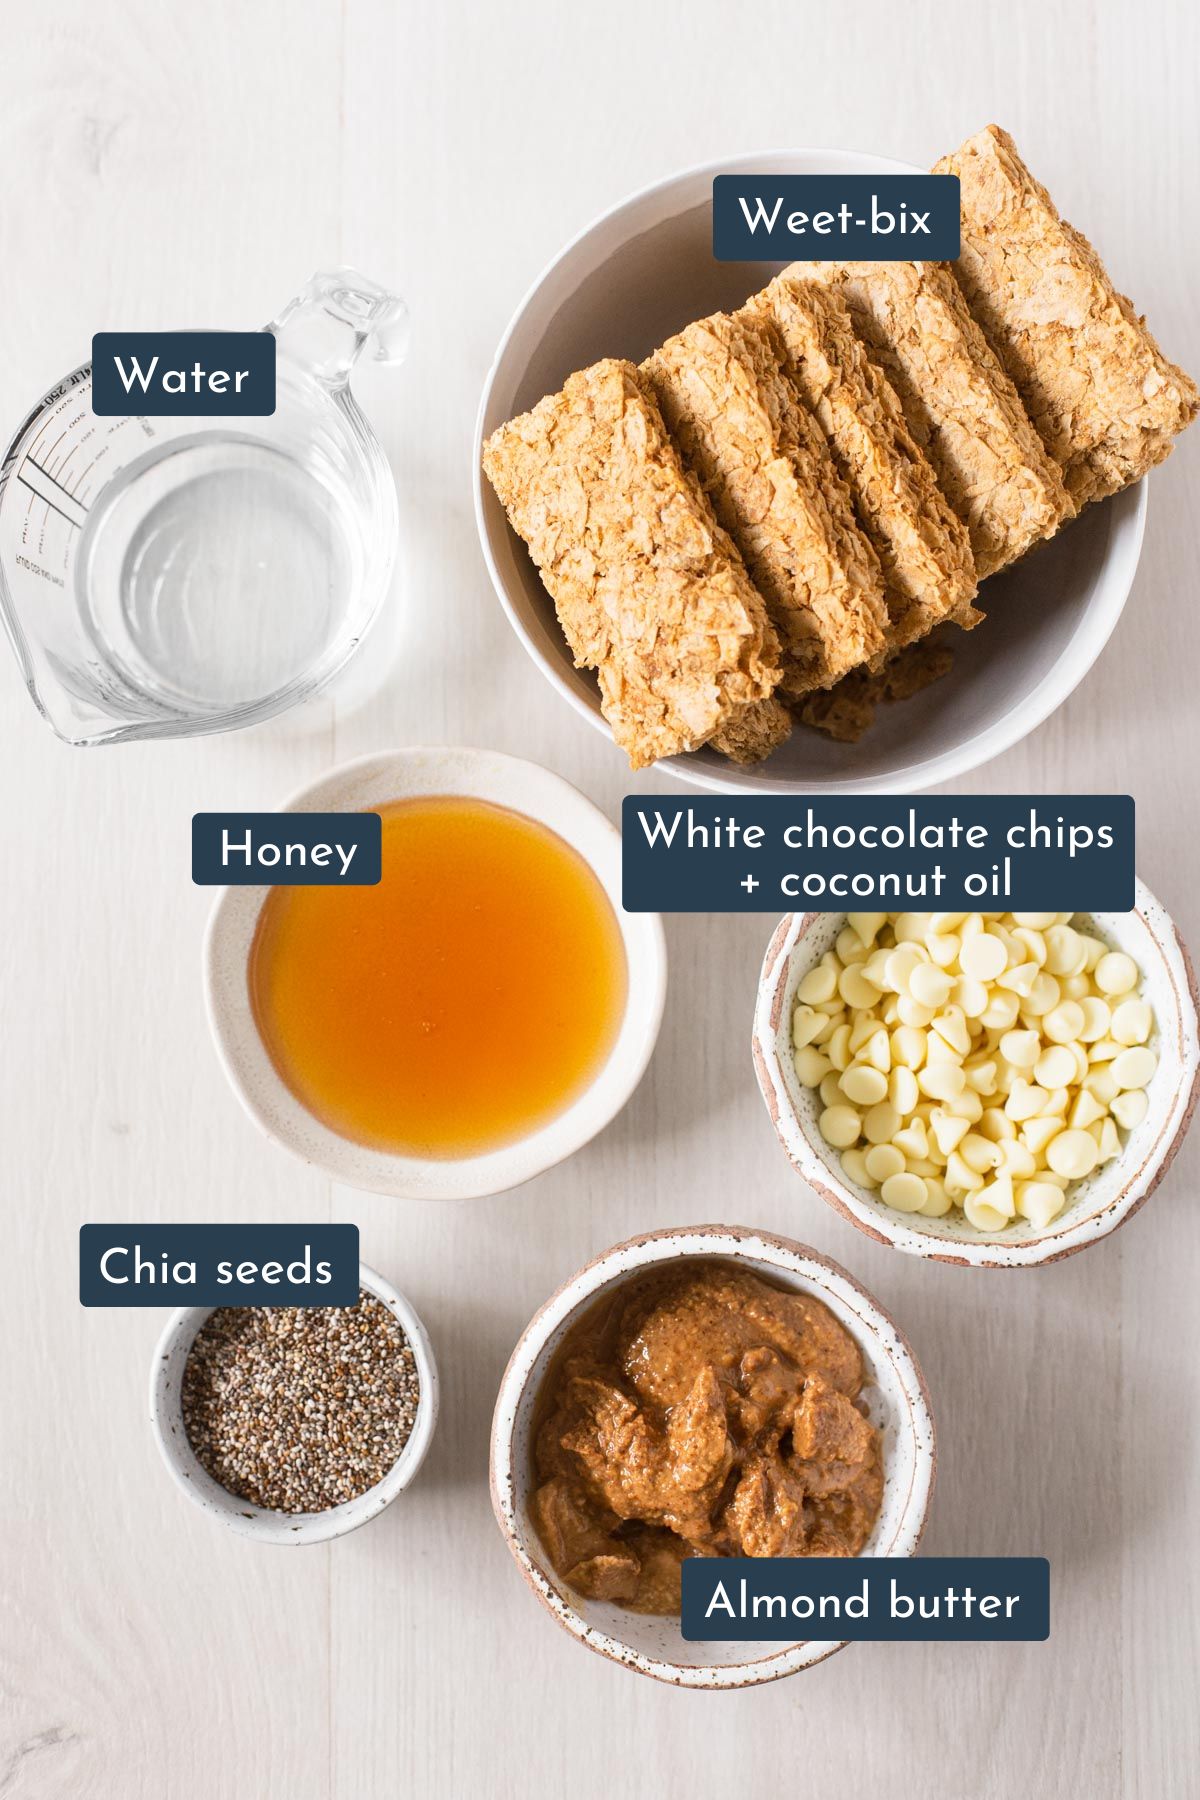 Ingredients needed to make Weetbix slice is Weetbix, water, chia seeds, almond butter, honey, white chocolate chips and coconut oil.